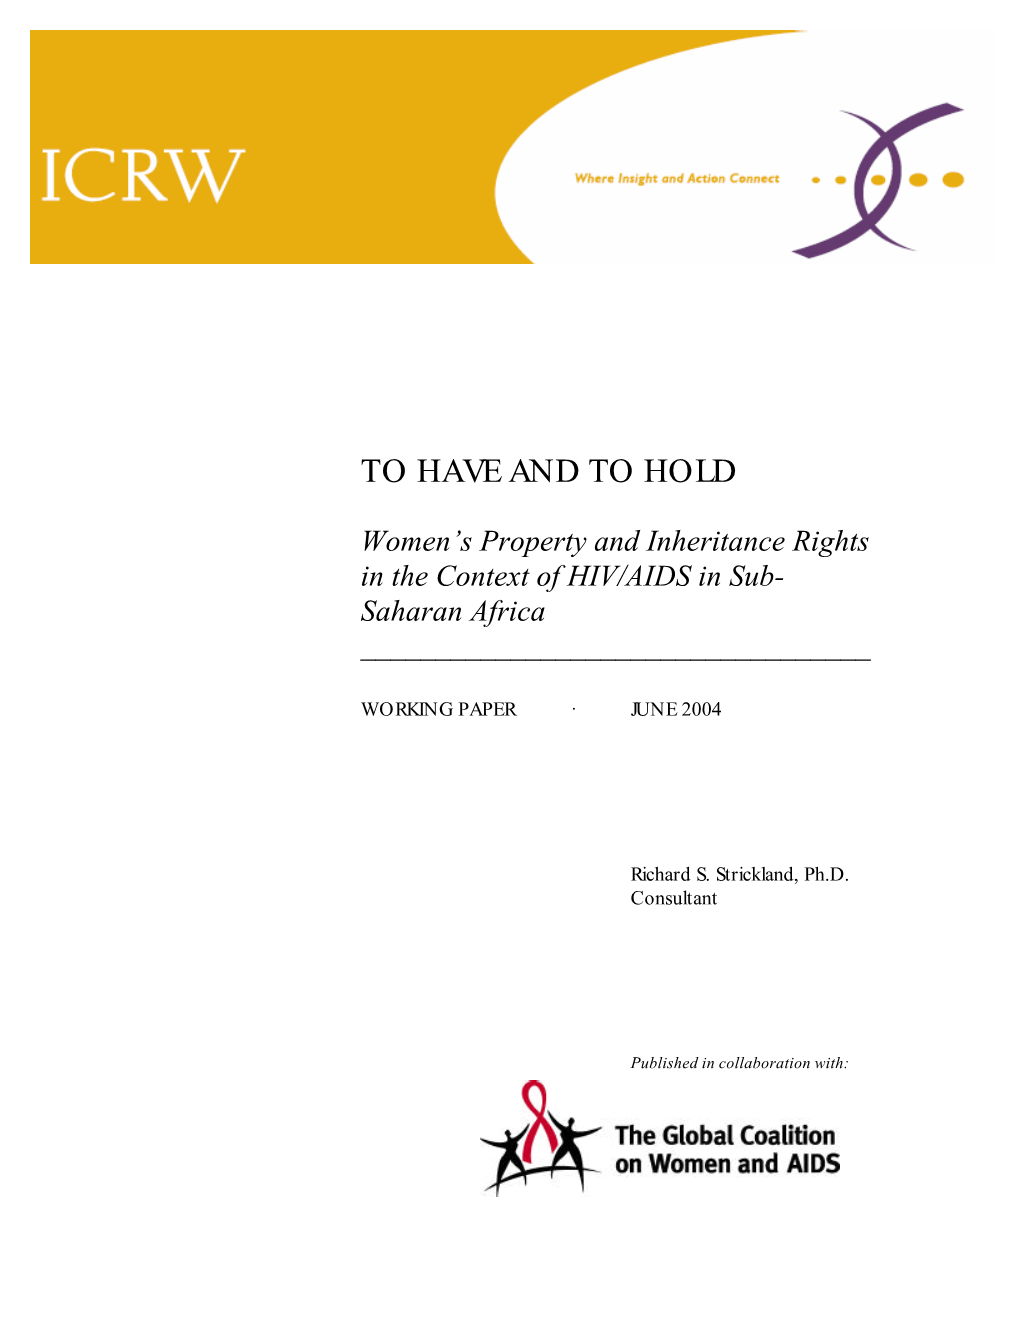 Women's Property and Inheritance Rights in the Context of HIV/AIDS